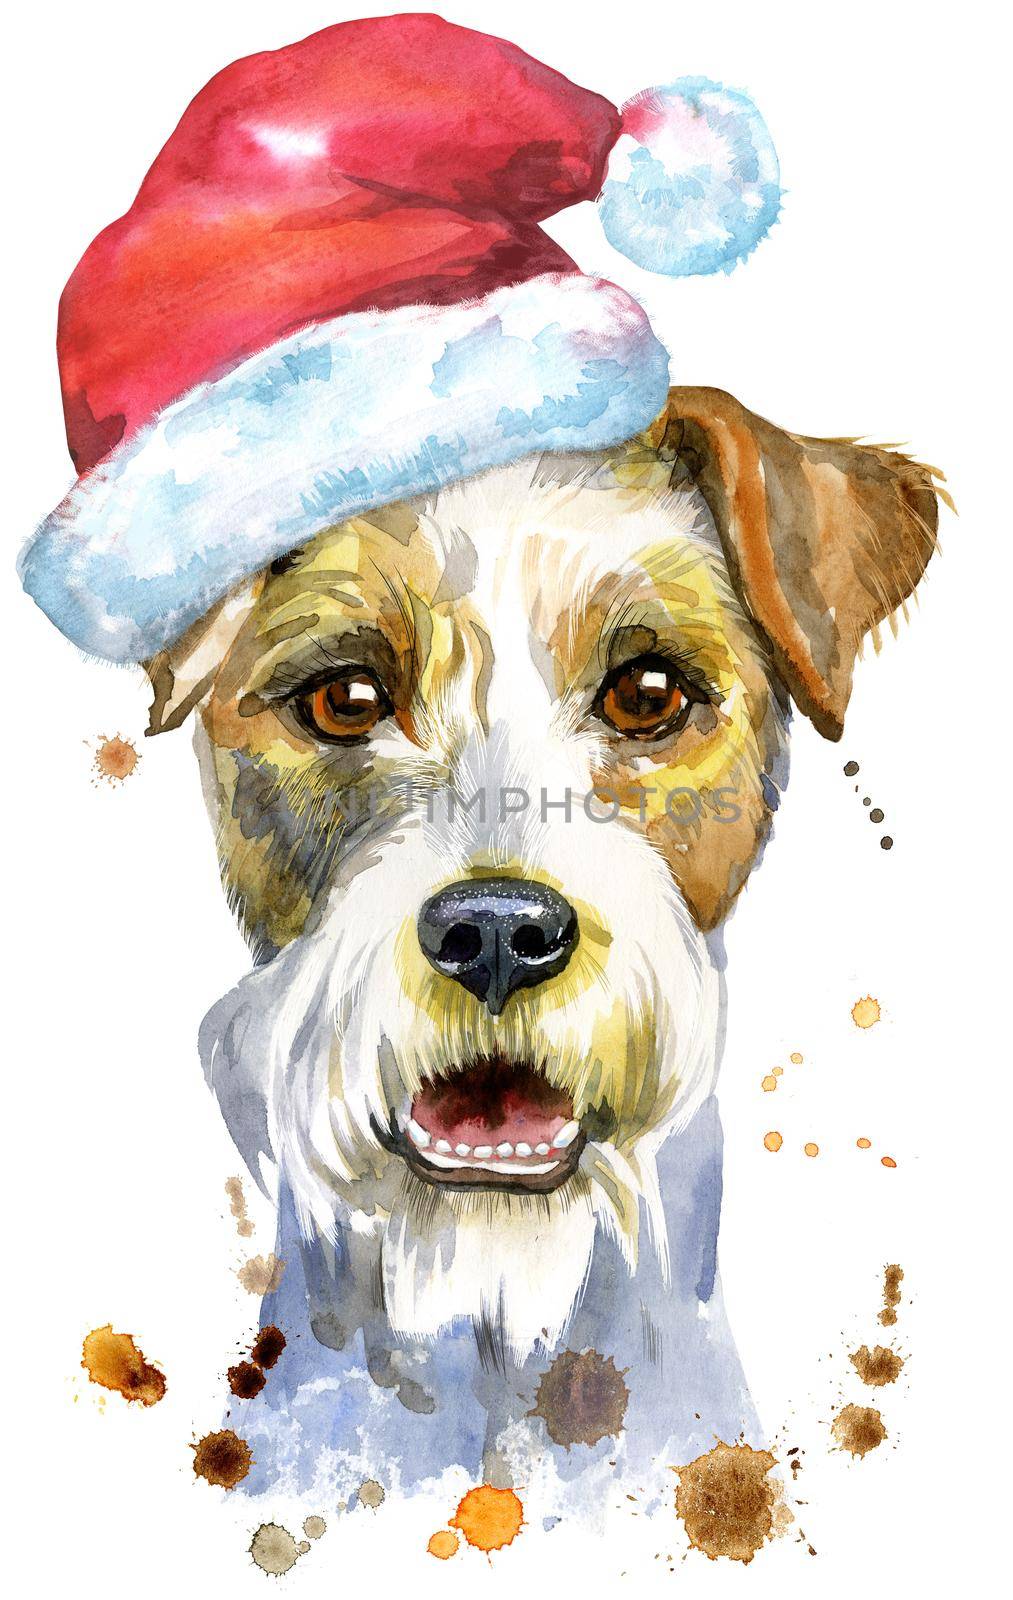 Watercolor portrait of airedale terrier dog with Santa hat by NataOmsk